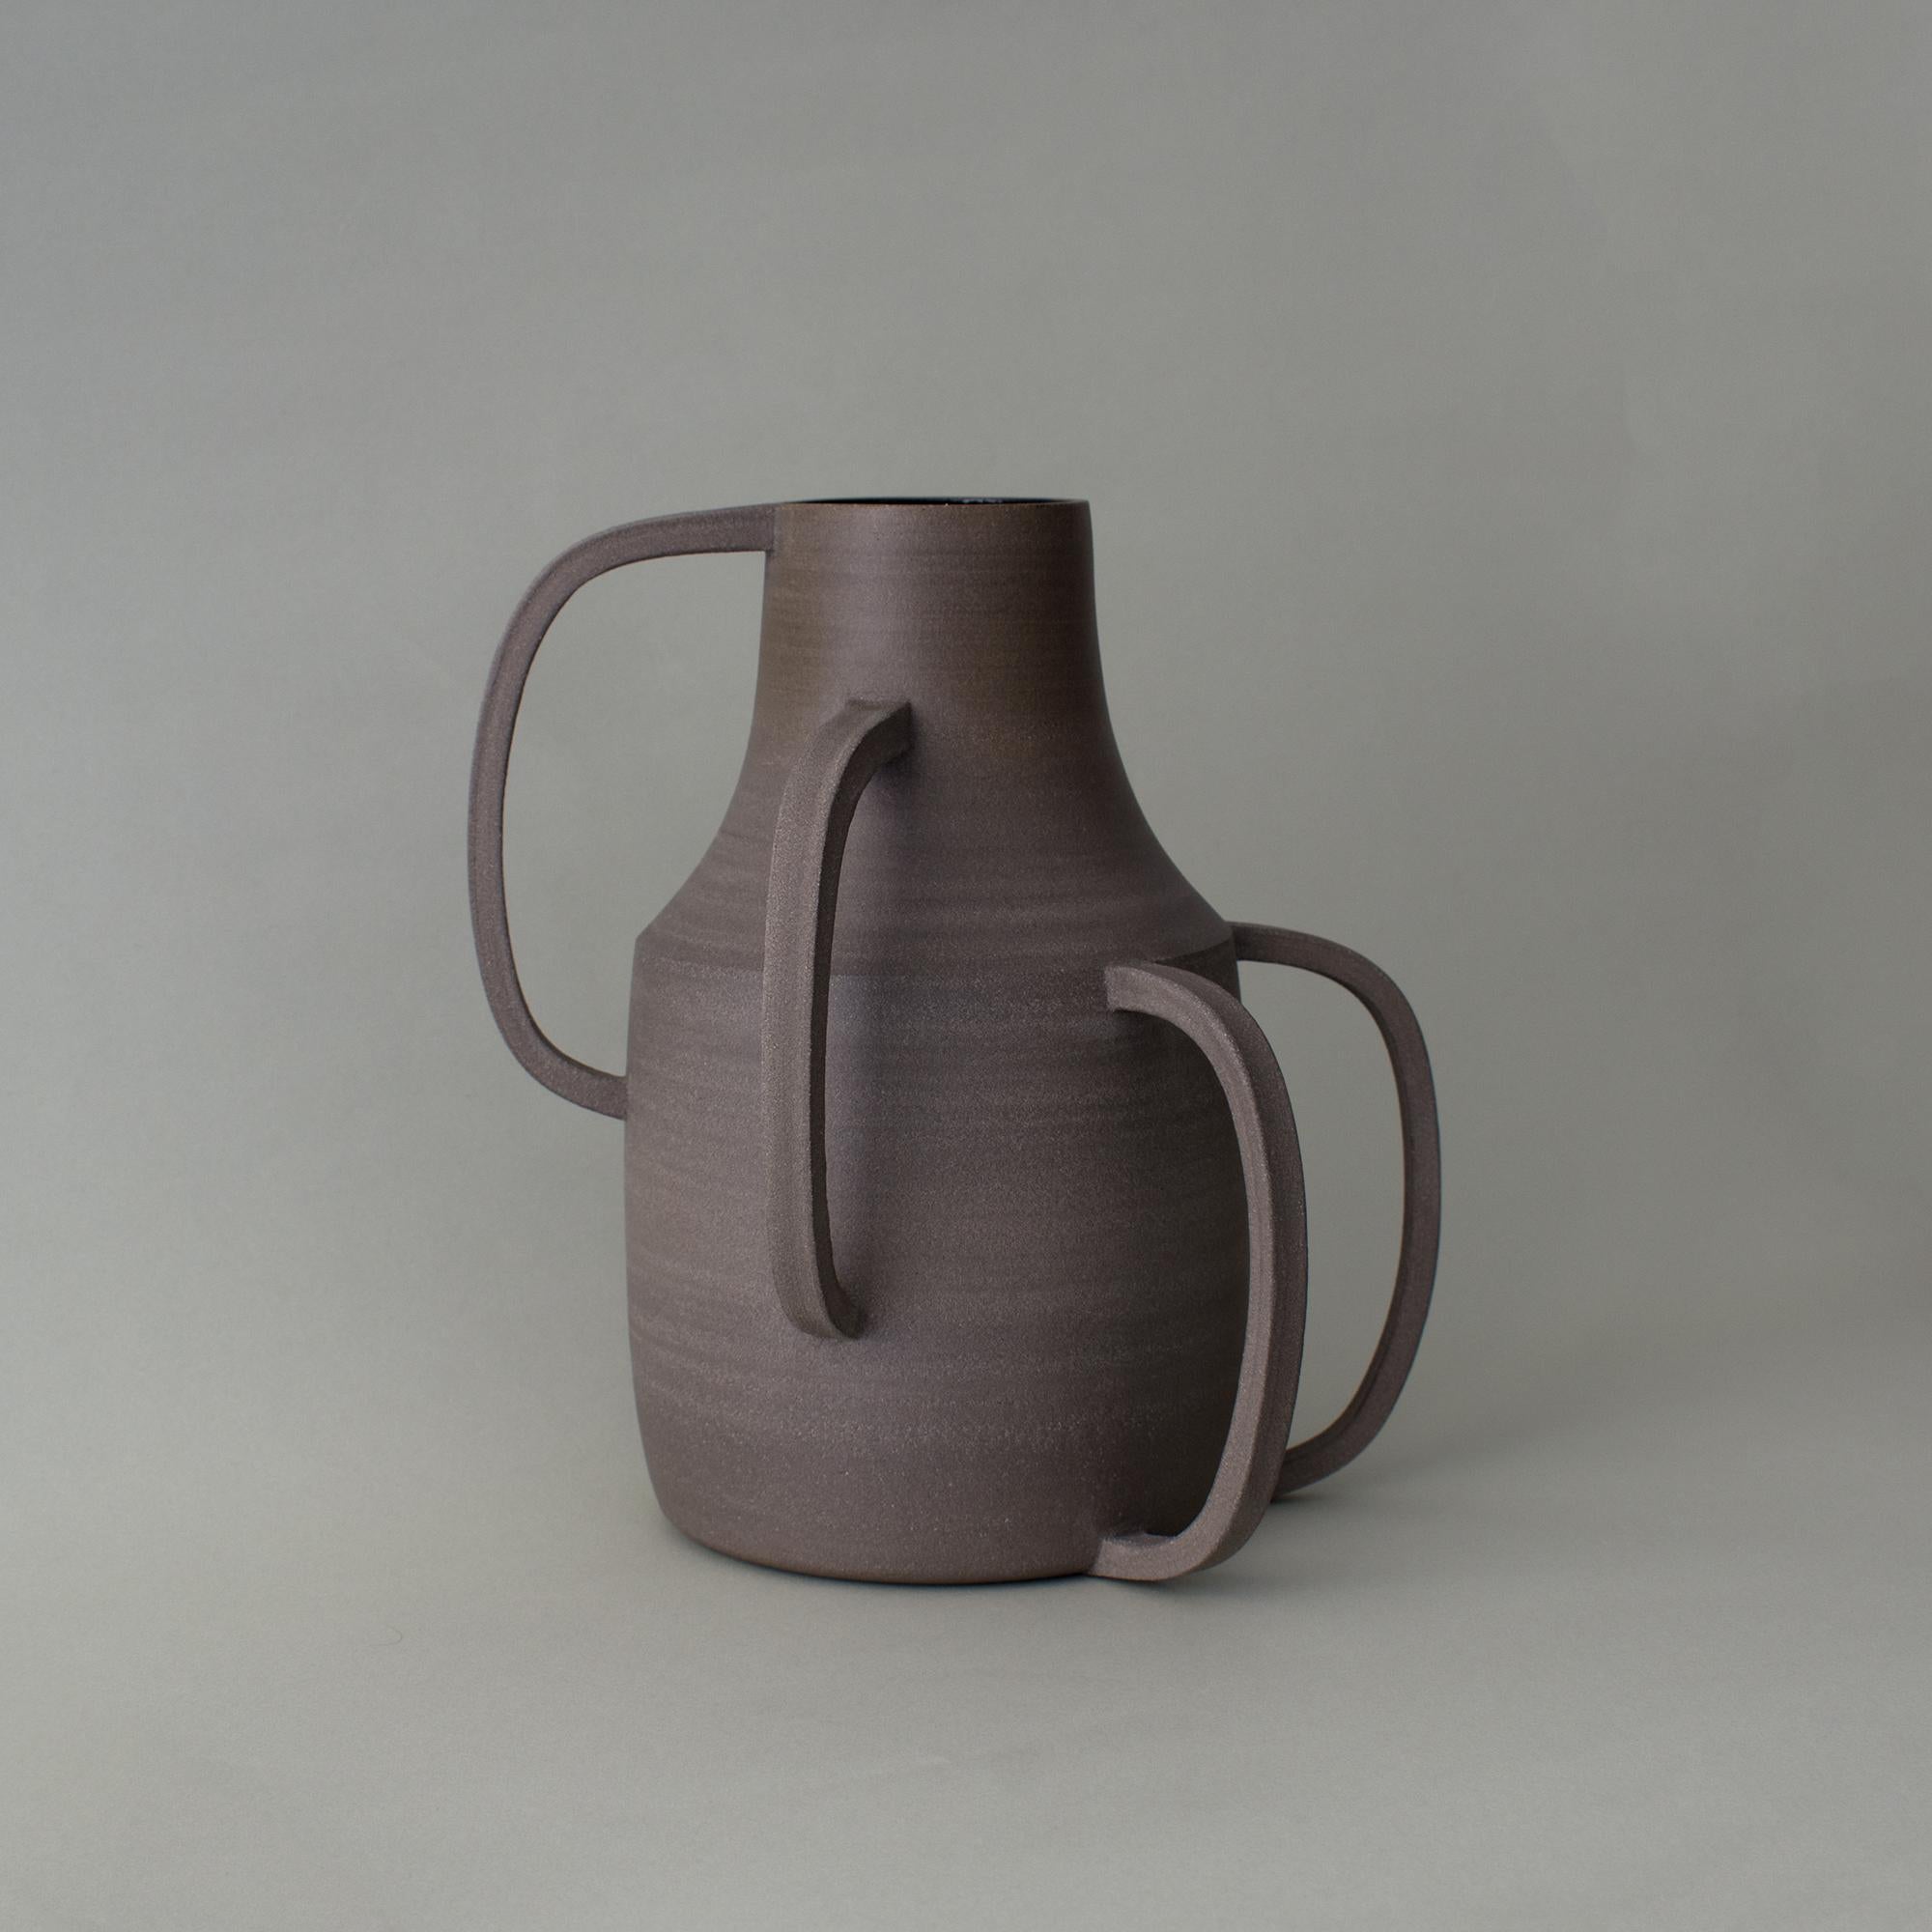 Vase V5-55-19, limited edition by Roni Feiten
Exclusive 
Dimensions: 18 x 14 x 19 cm
Materials: Clay

As all ceramics are handmade, each item is a unique piece that can slightly vary from the shown pictures. Any occurring irregularities in